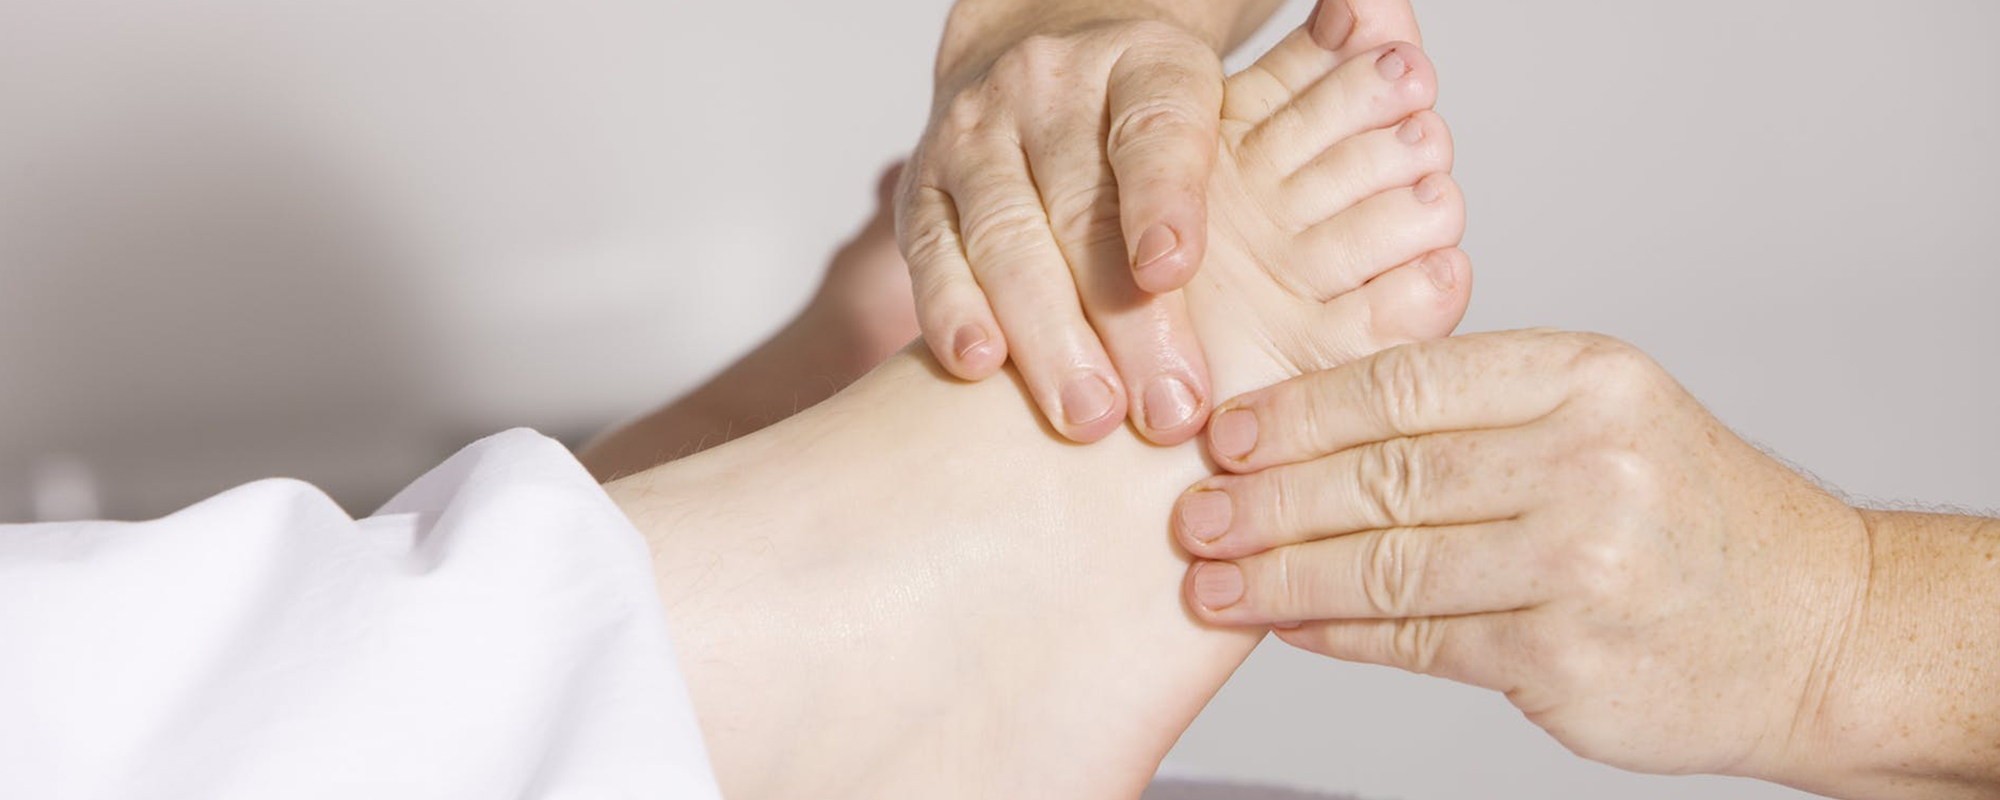 Physiotherapy Services That You Can Trust